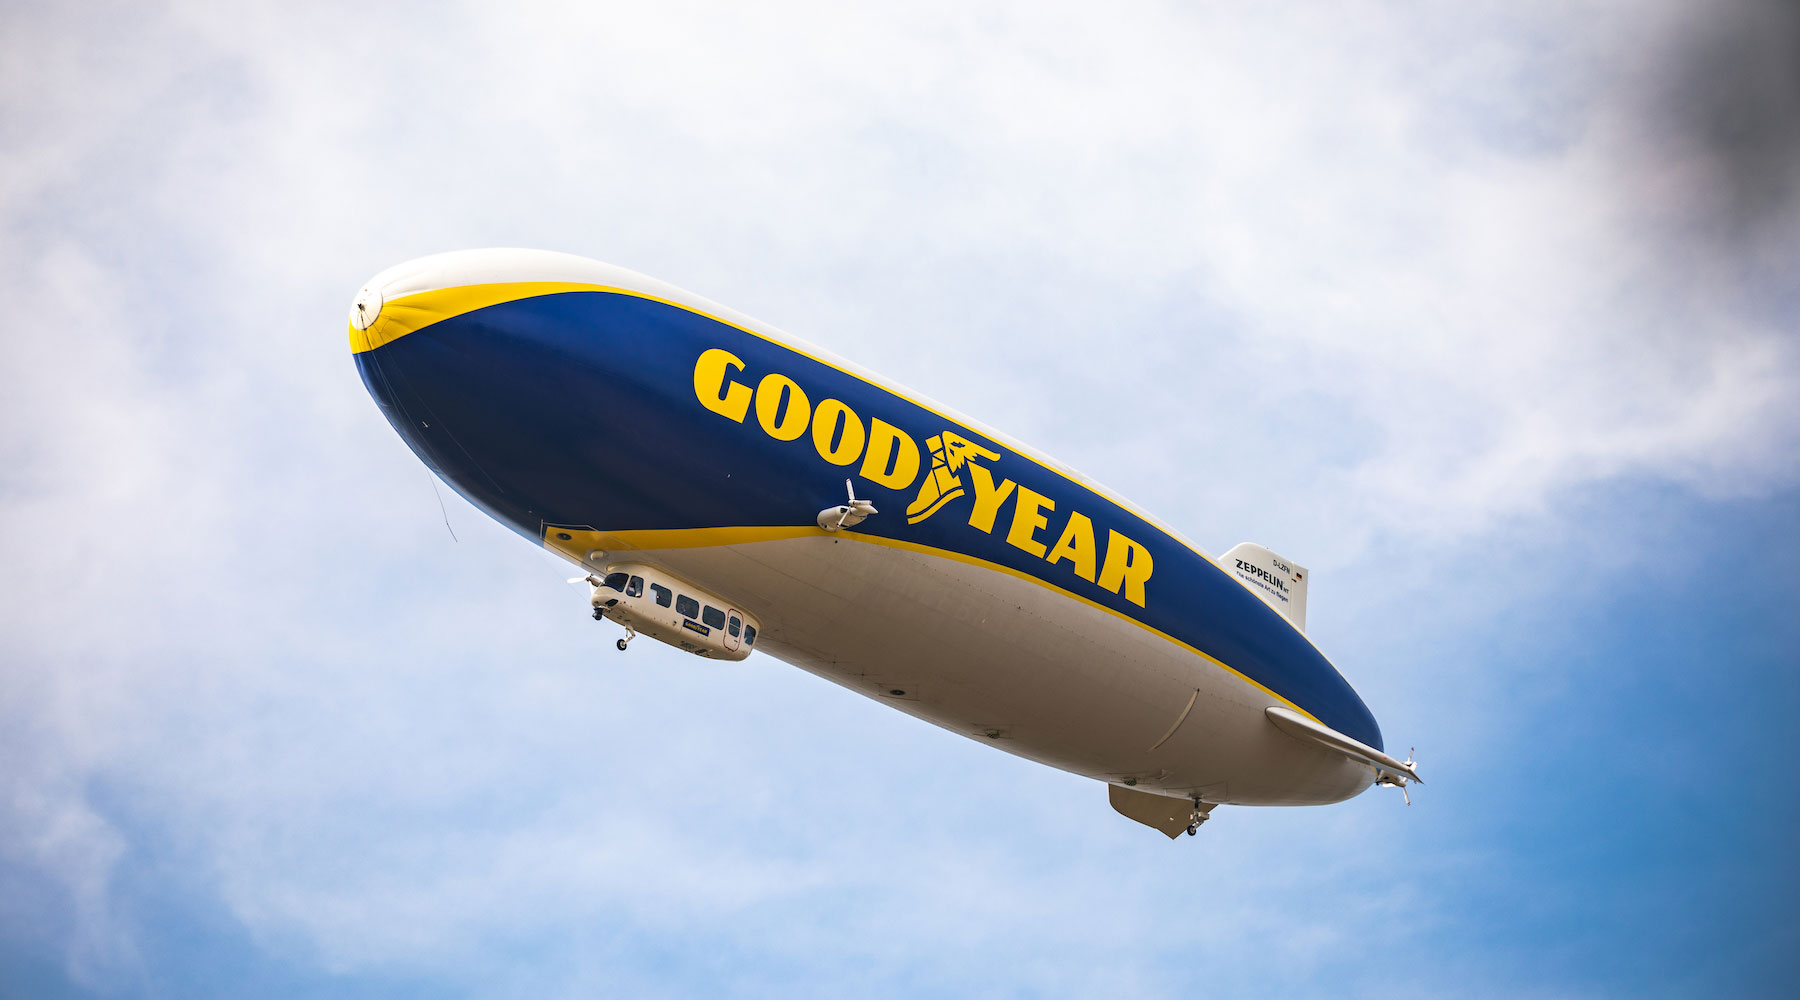 The Goodyear Blimp will be flying over London next month